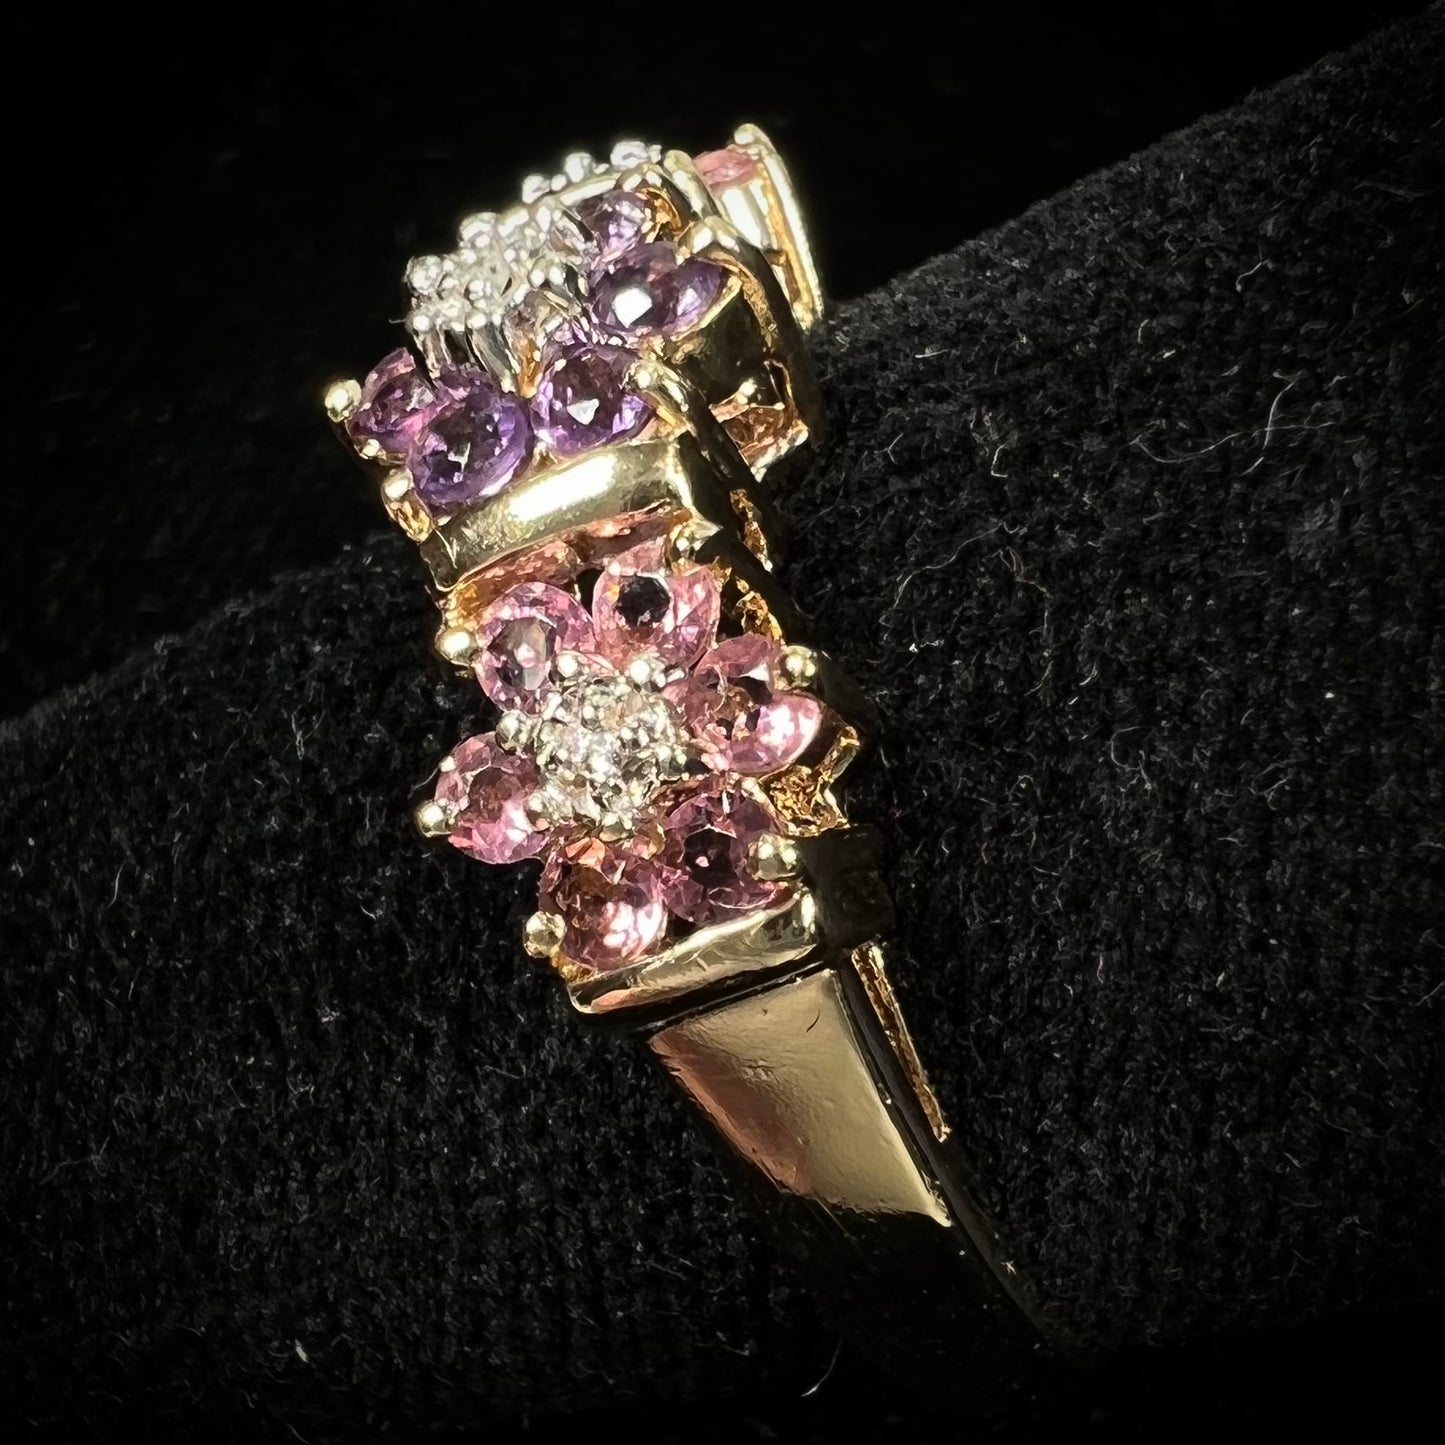 A vintage ladies' flower ring set with set with amethyst and pink tourmaline petals with a diamond center stone.